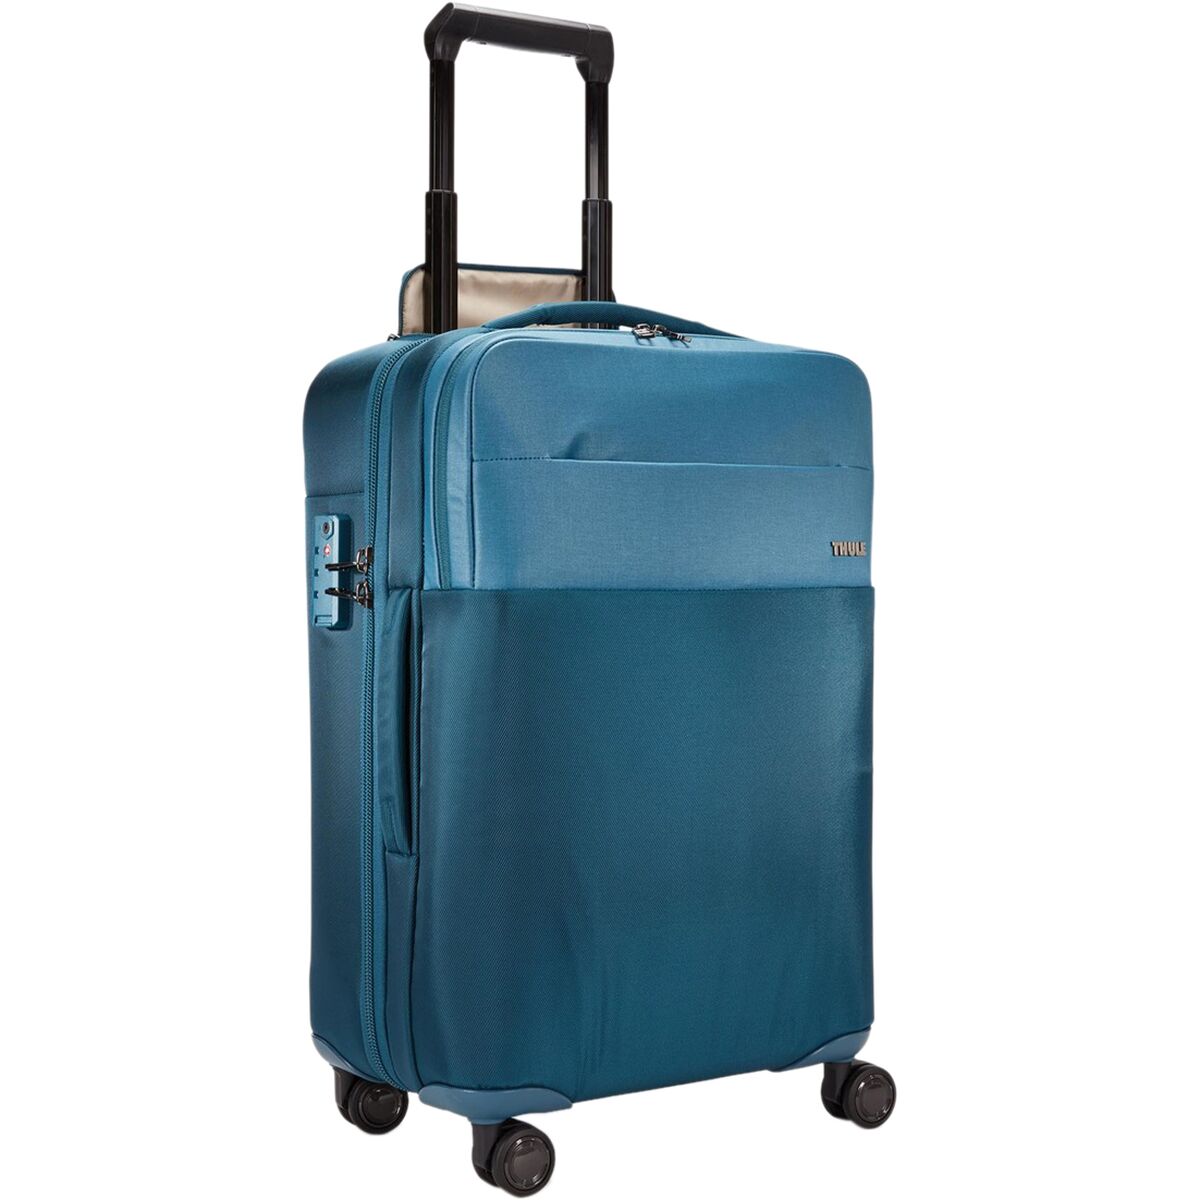 Thule Spira Limited Edition Carry-On Spinner 35L Bag